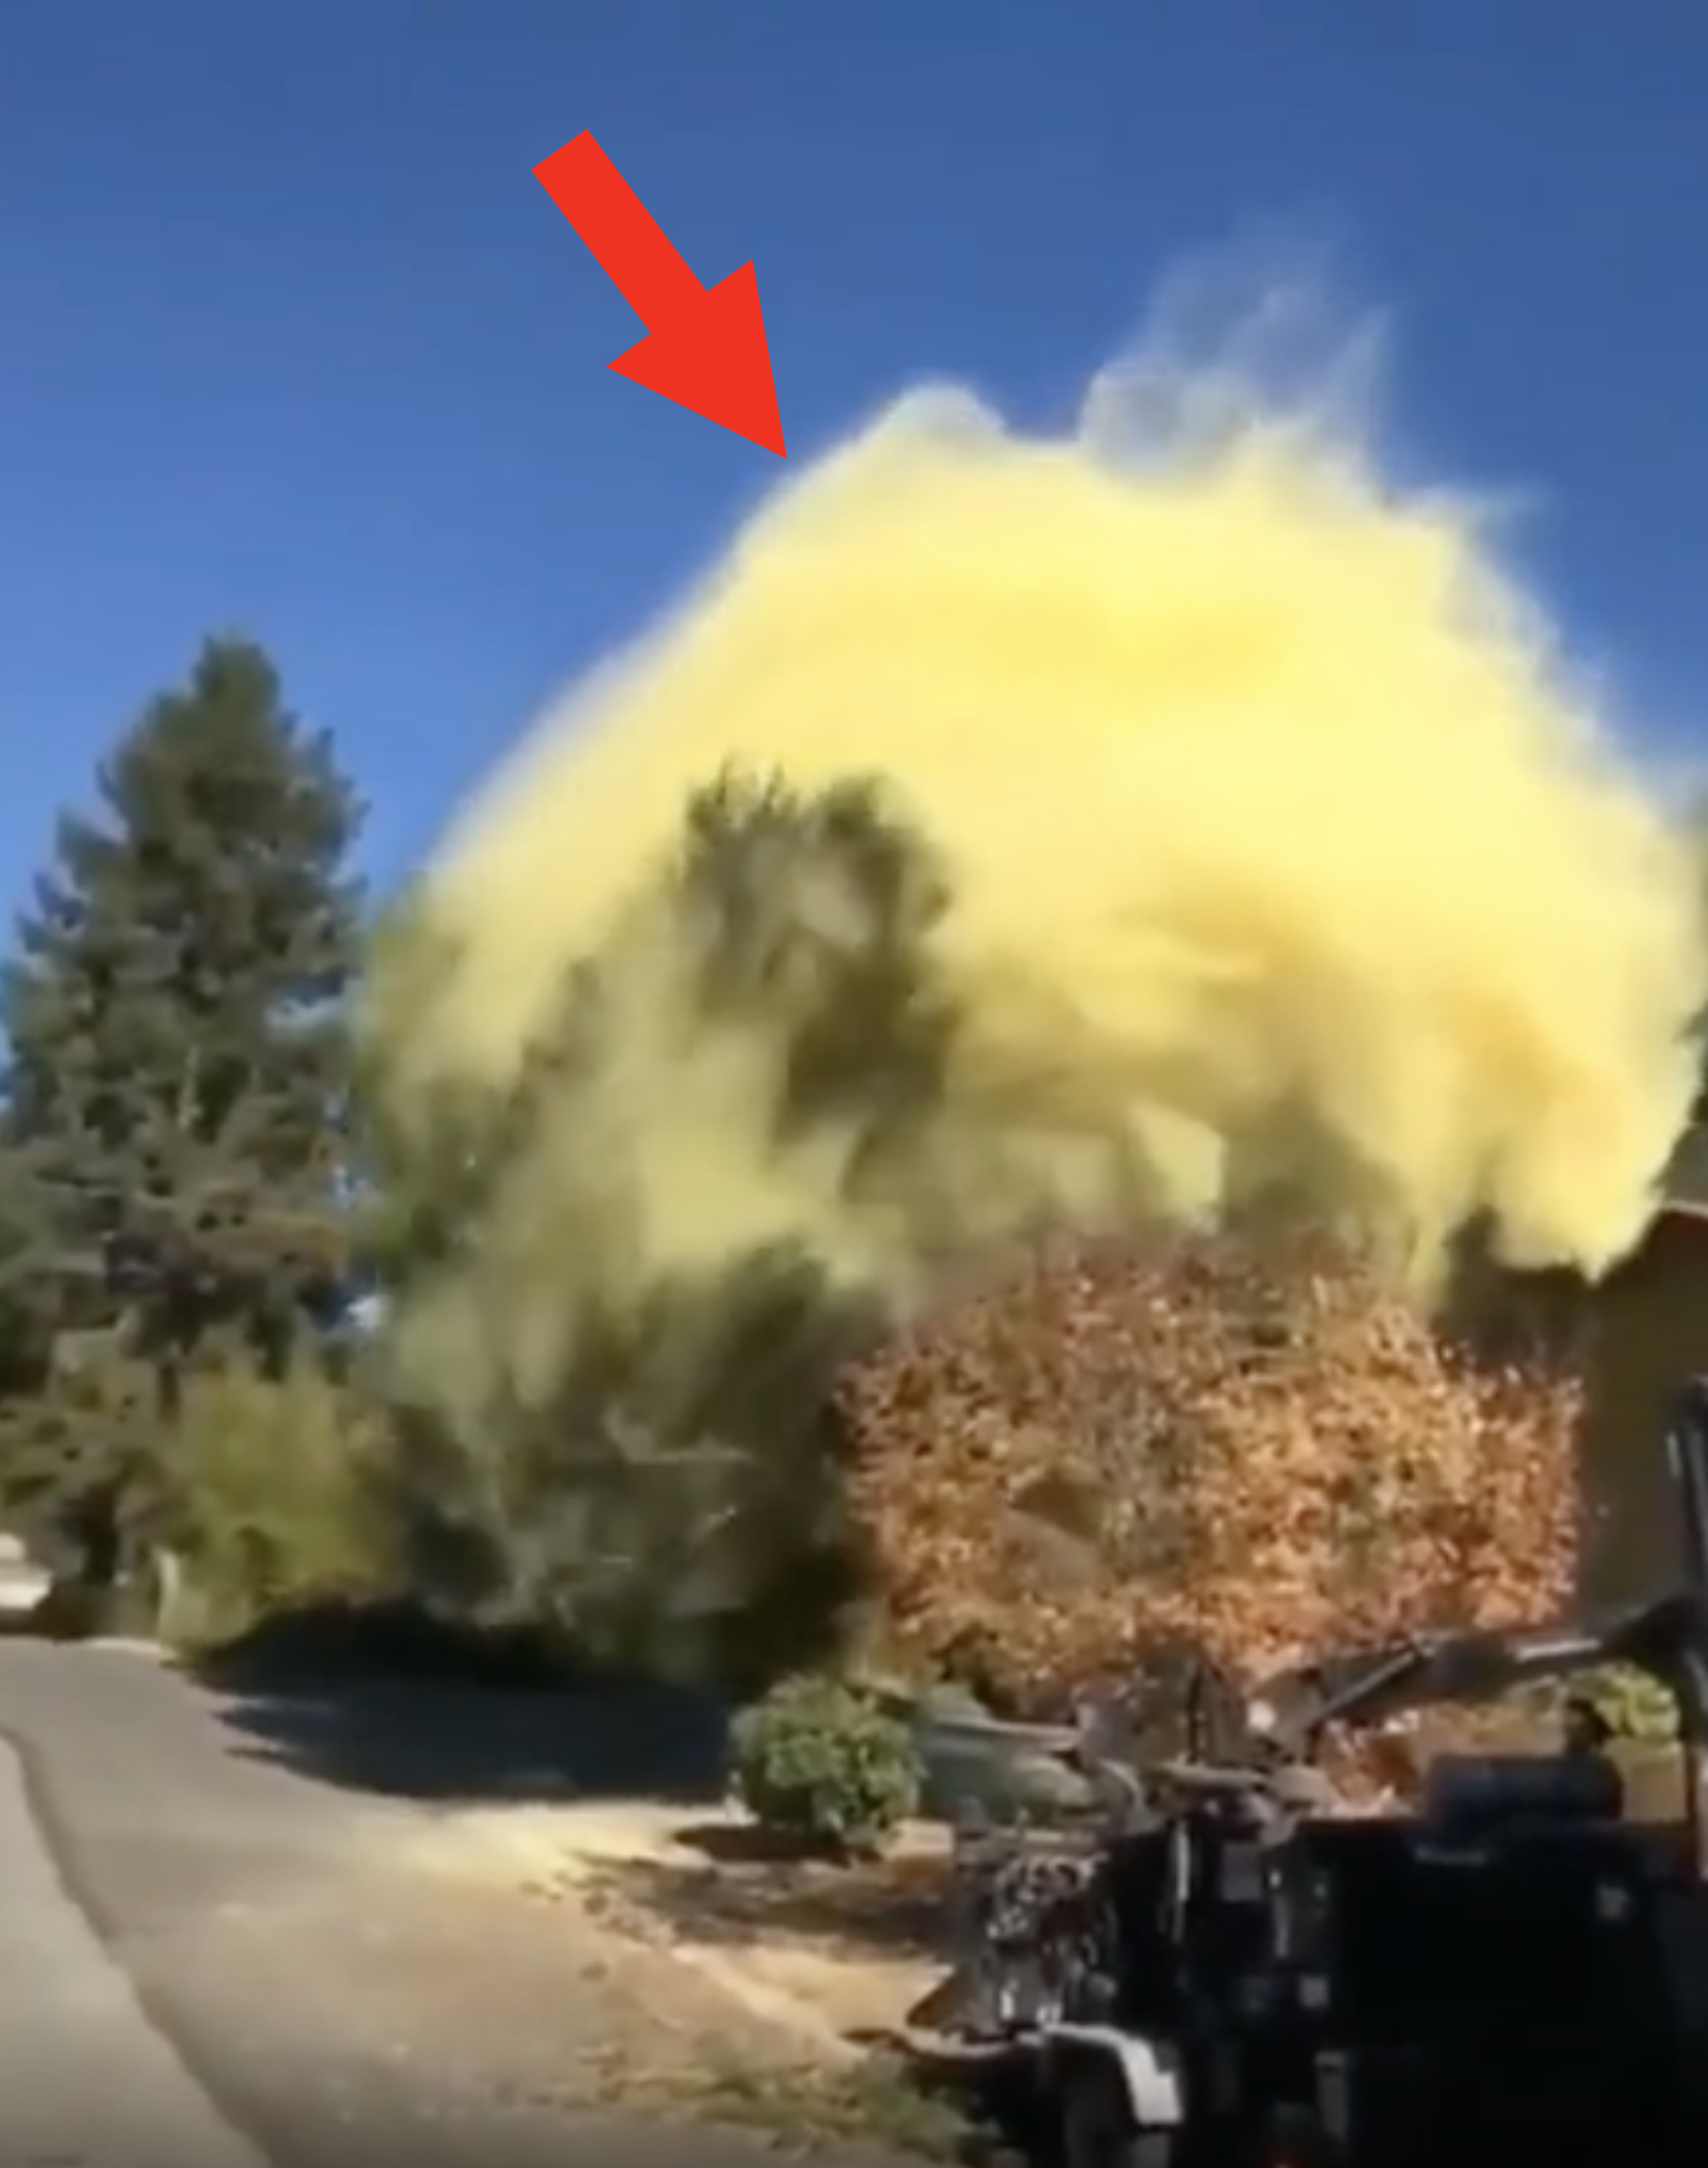 A large yellow smoke cloud billows from a device on a residential street, with trees and a clear sky in the background